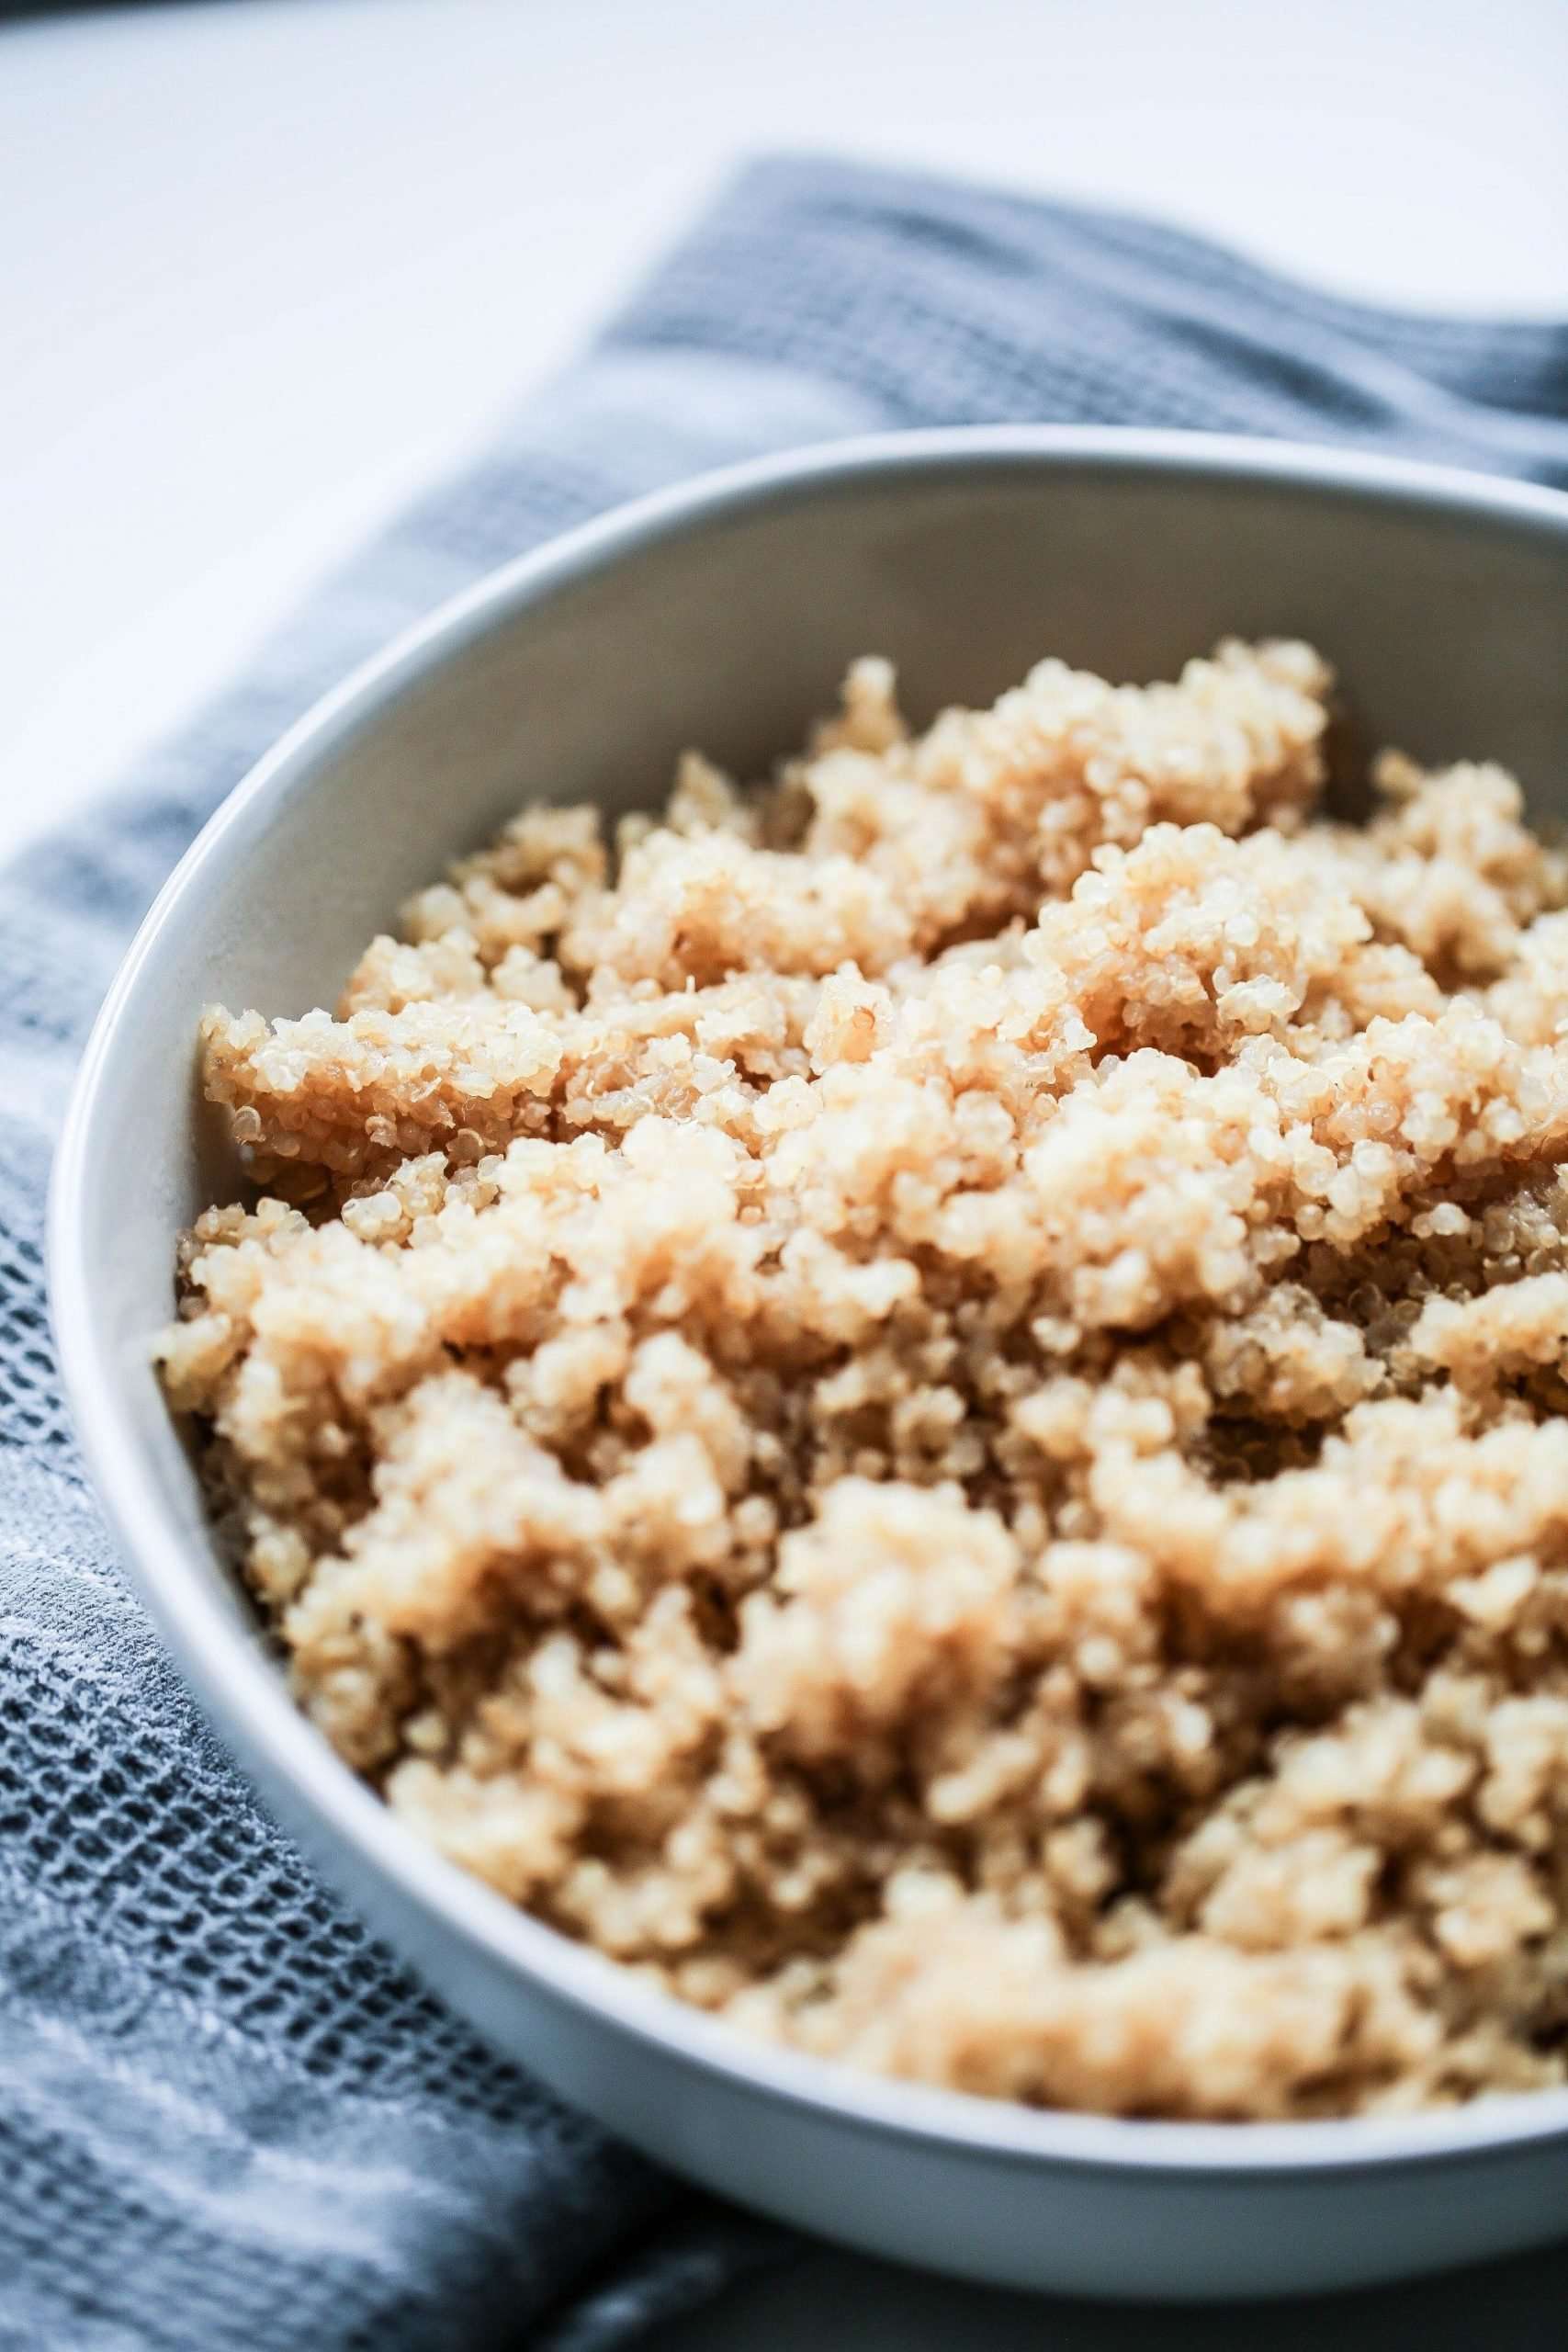 How to make quinoa in an instant pot